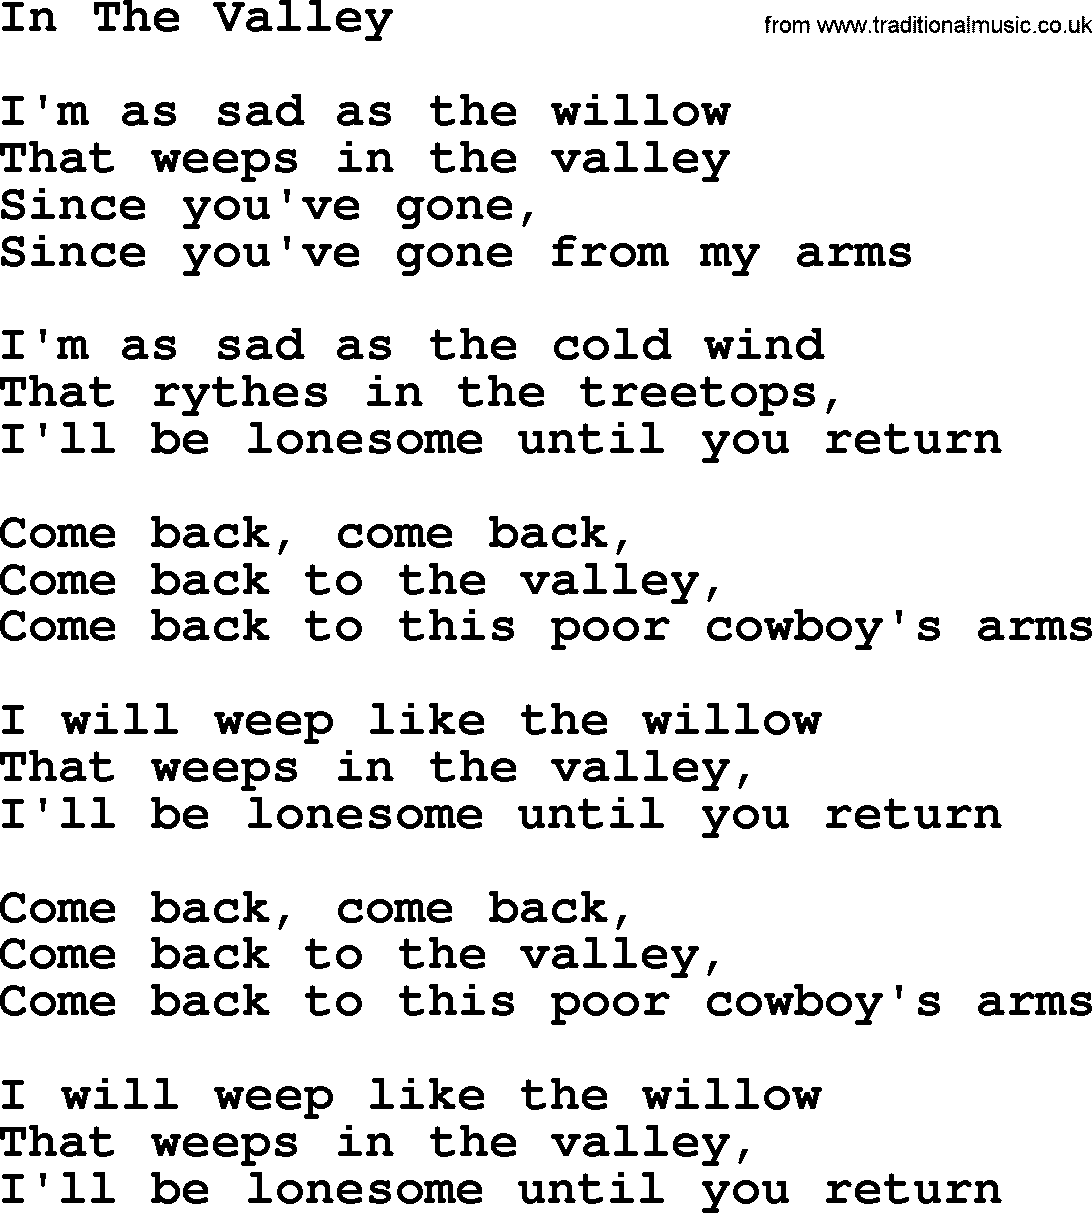 Marty Robbins song: In The Valley, lyrics